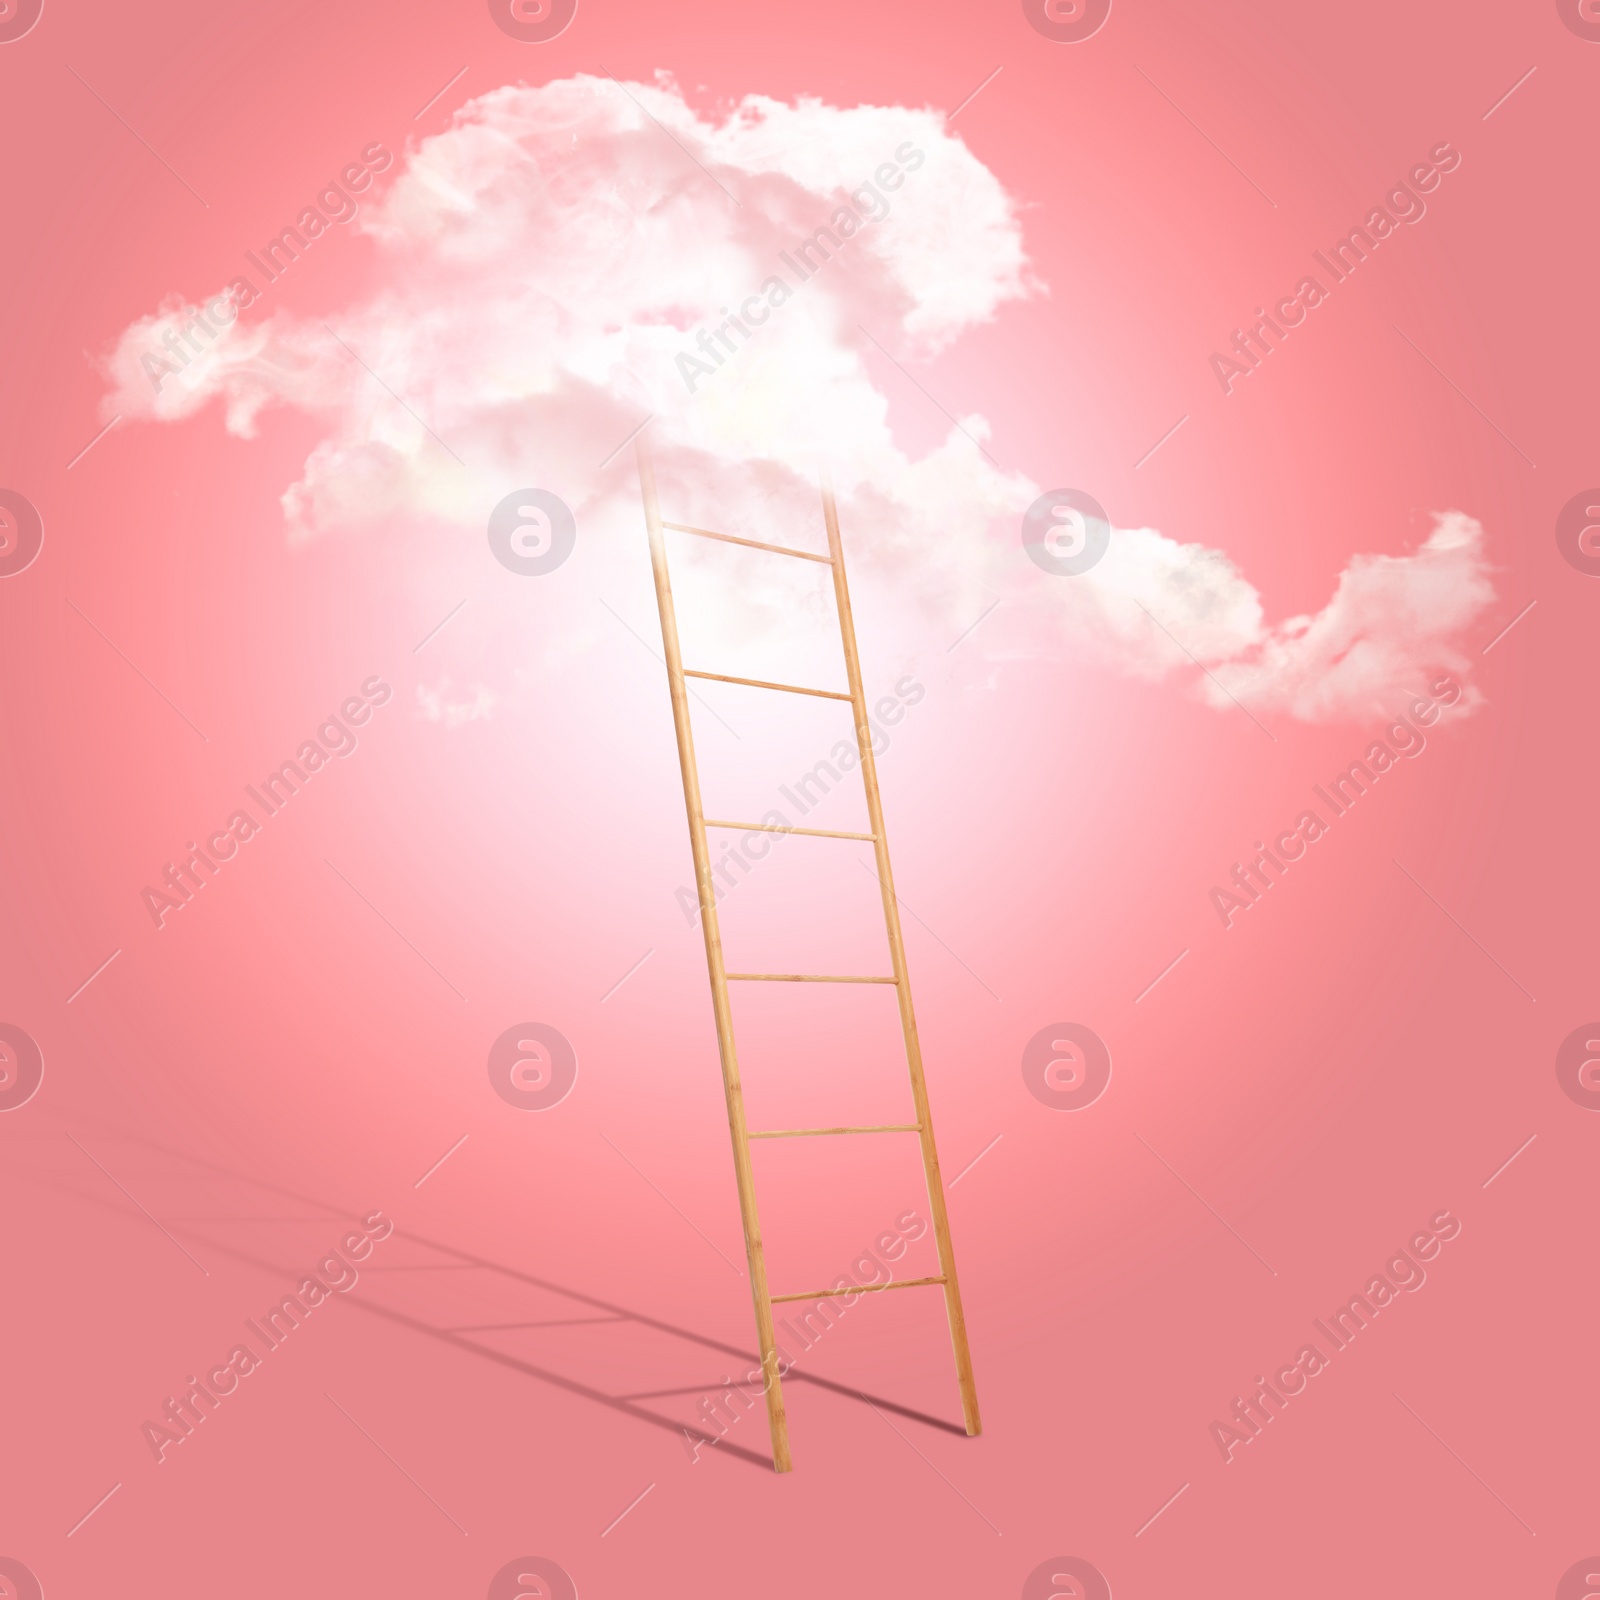 Image of Wooden ladder leading to white cloud on pink background. Concept of growth and development